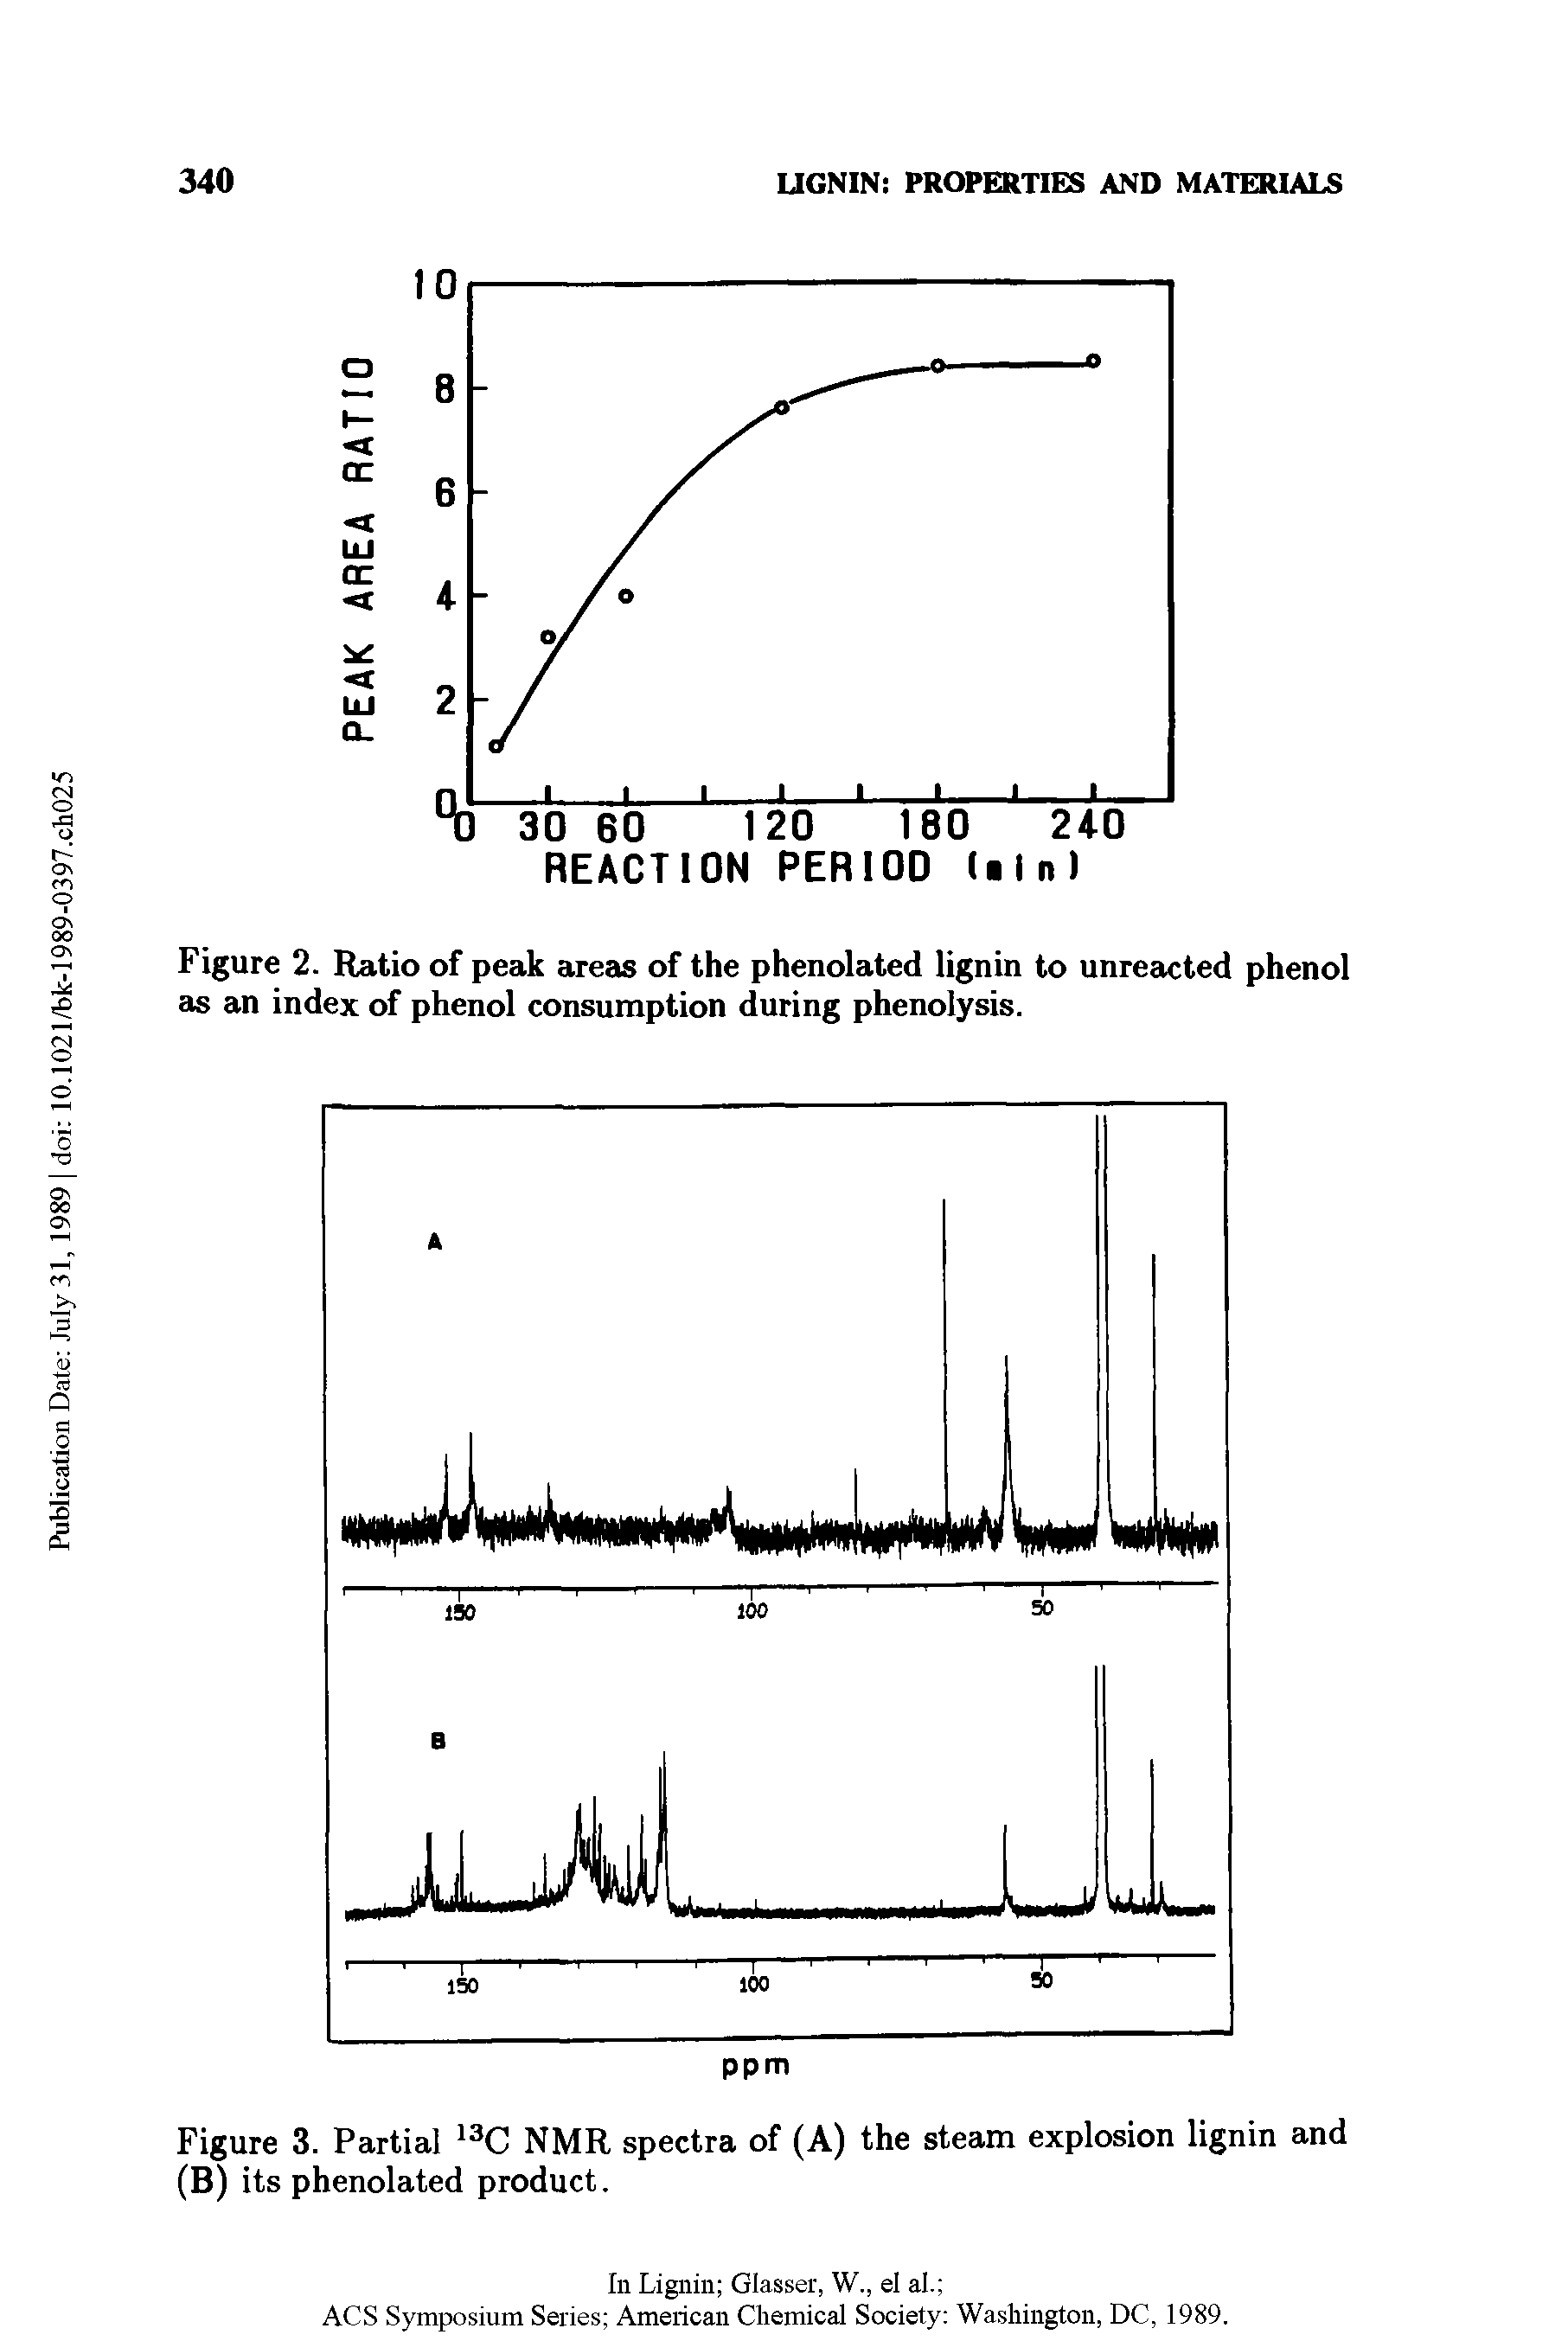 Figure 2. Ratio of peak areas of the phenolated lignin to unreacted phenol as an index of phenol consumption during phenolysis.